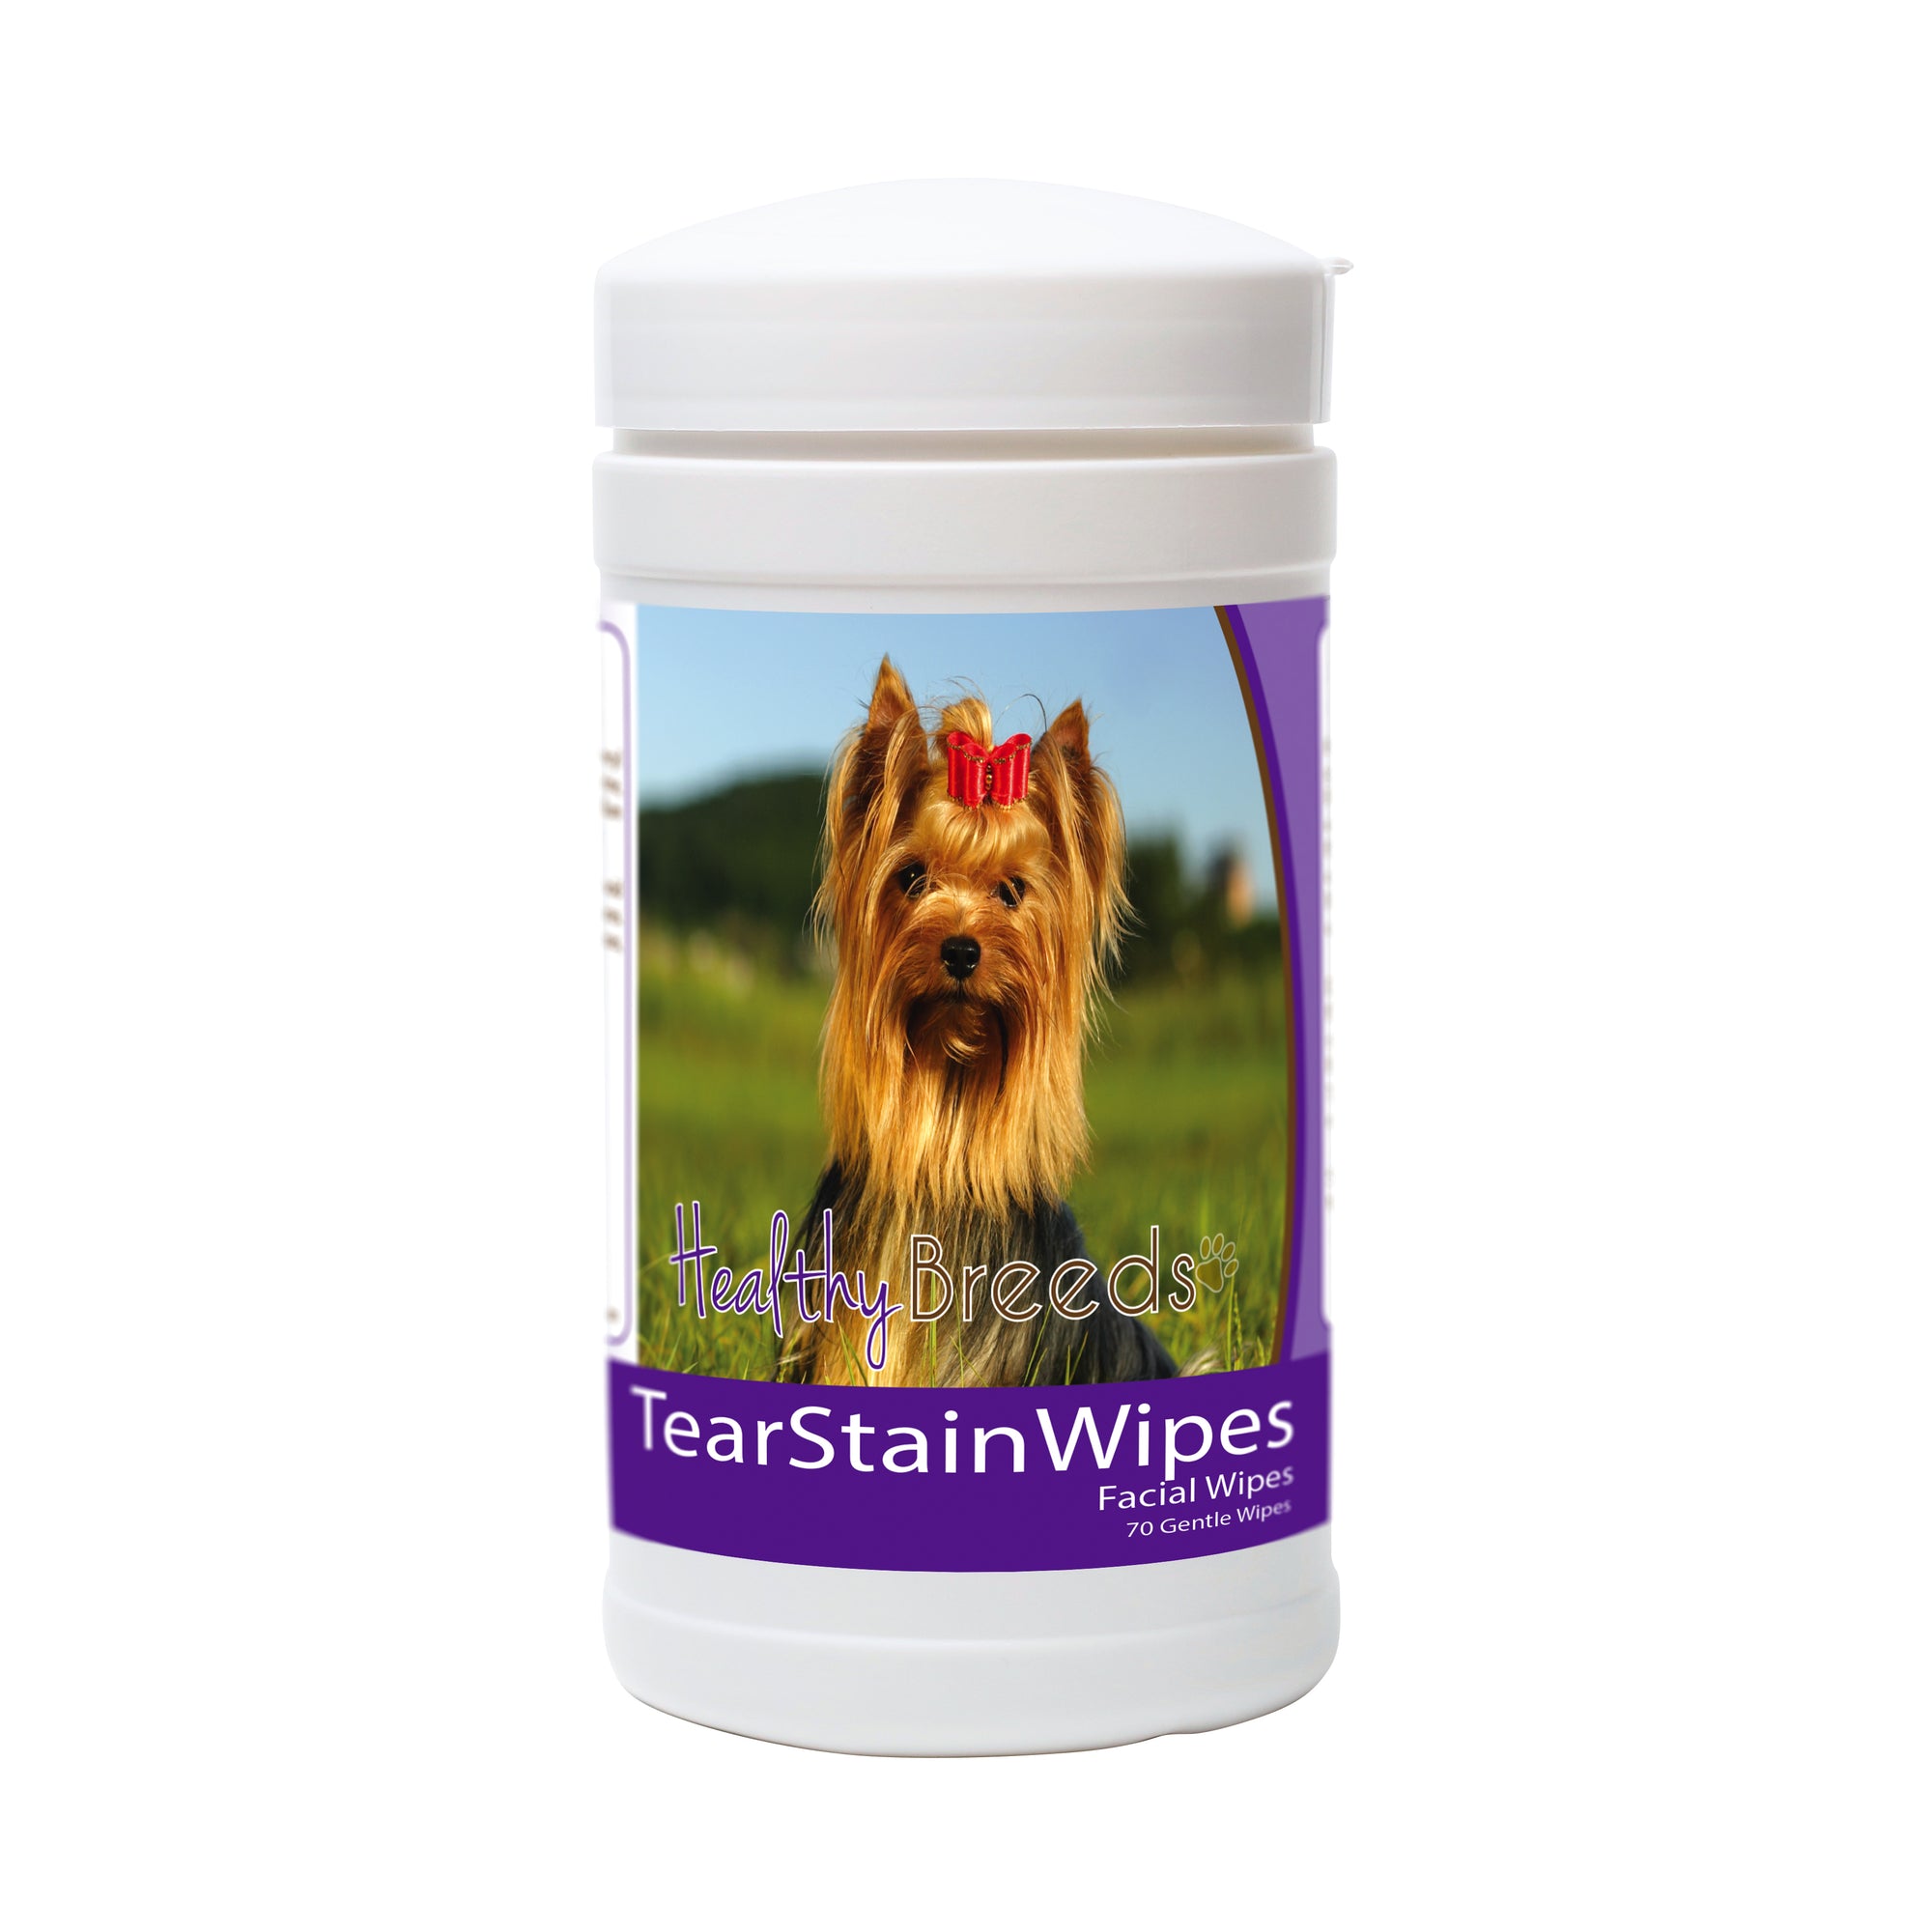 Healthy Breeds Yorkshire Terrier Tear Stain Wipes 70 Count